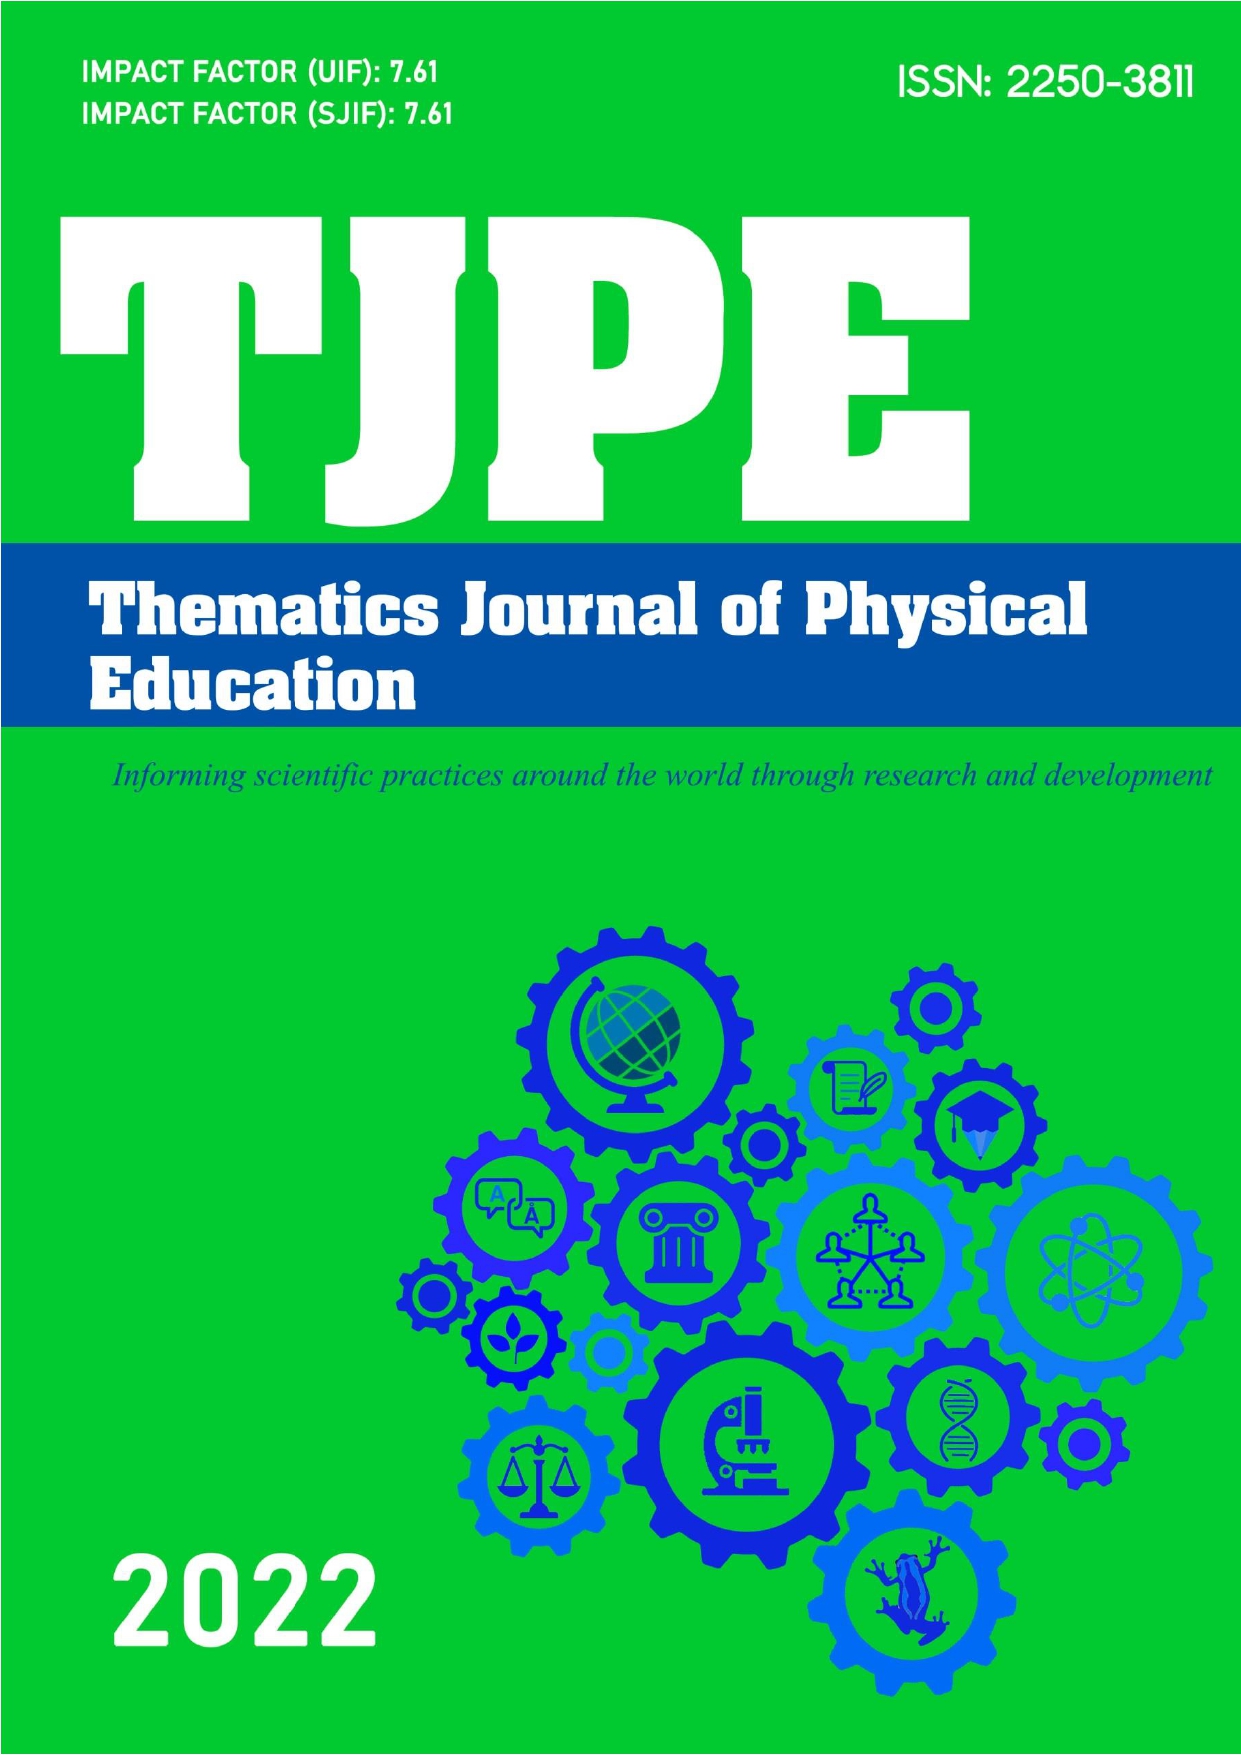 					View Vol. 5 No. 1 (2022): THEMATICS JOURNAL OF PHYSICAL EDUCATION
				